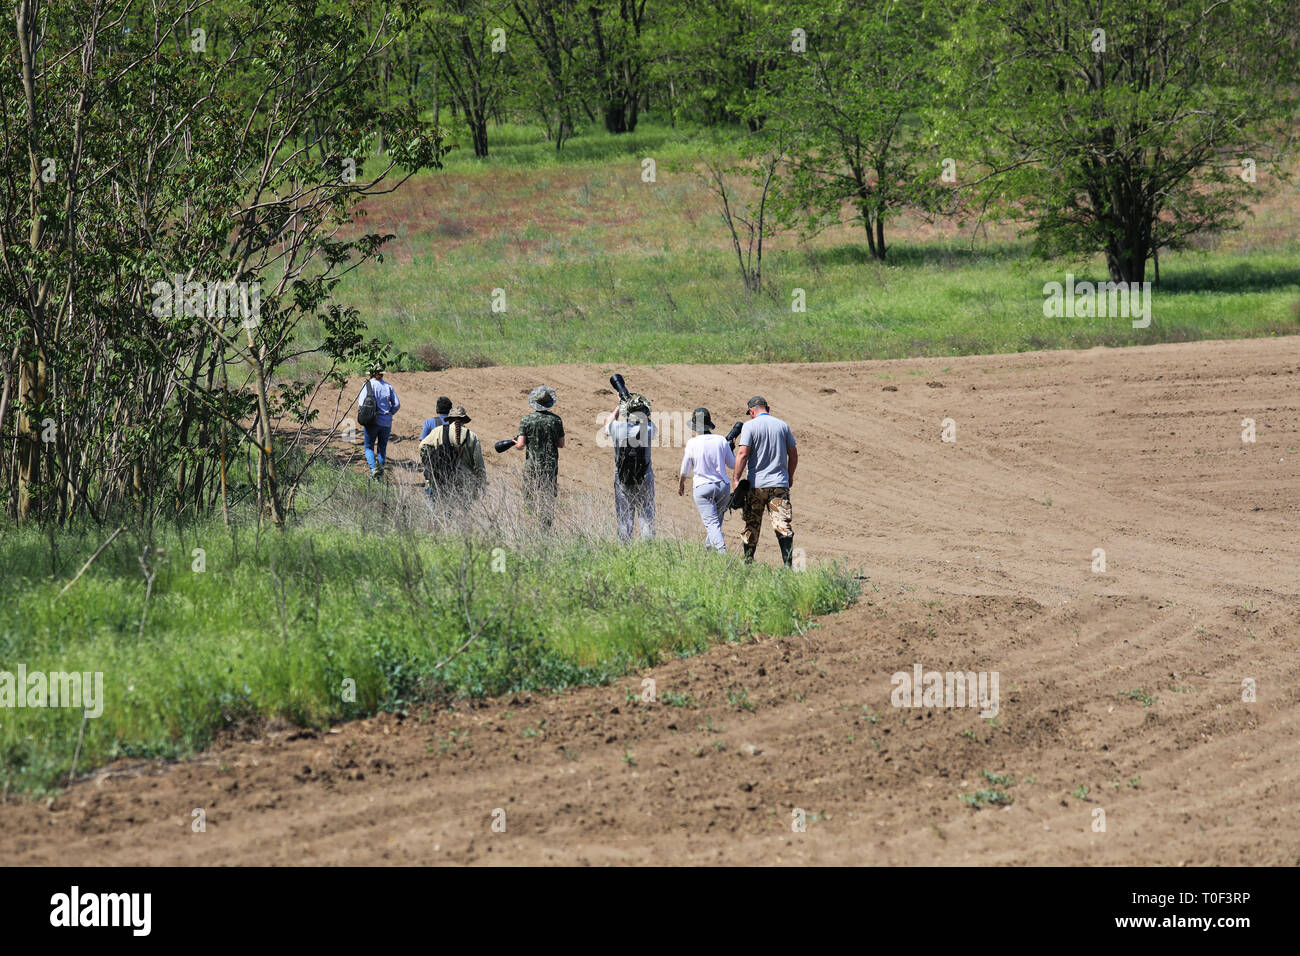 Tulcea / Romania - May 05, 2018: Group of unidentifiable photographers and birdwatchers looking for birds. Wildlife photography Stock Photo